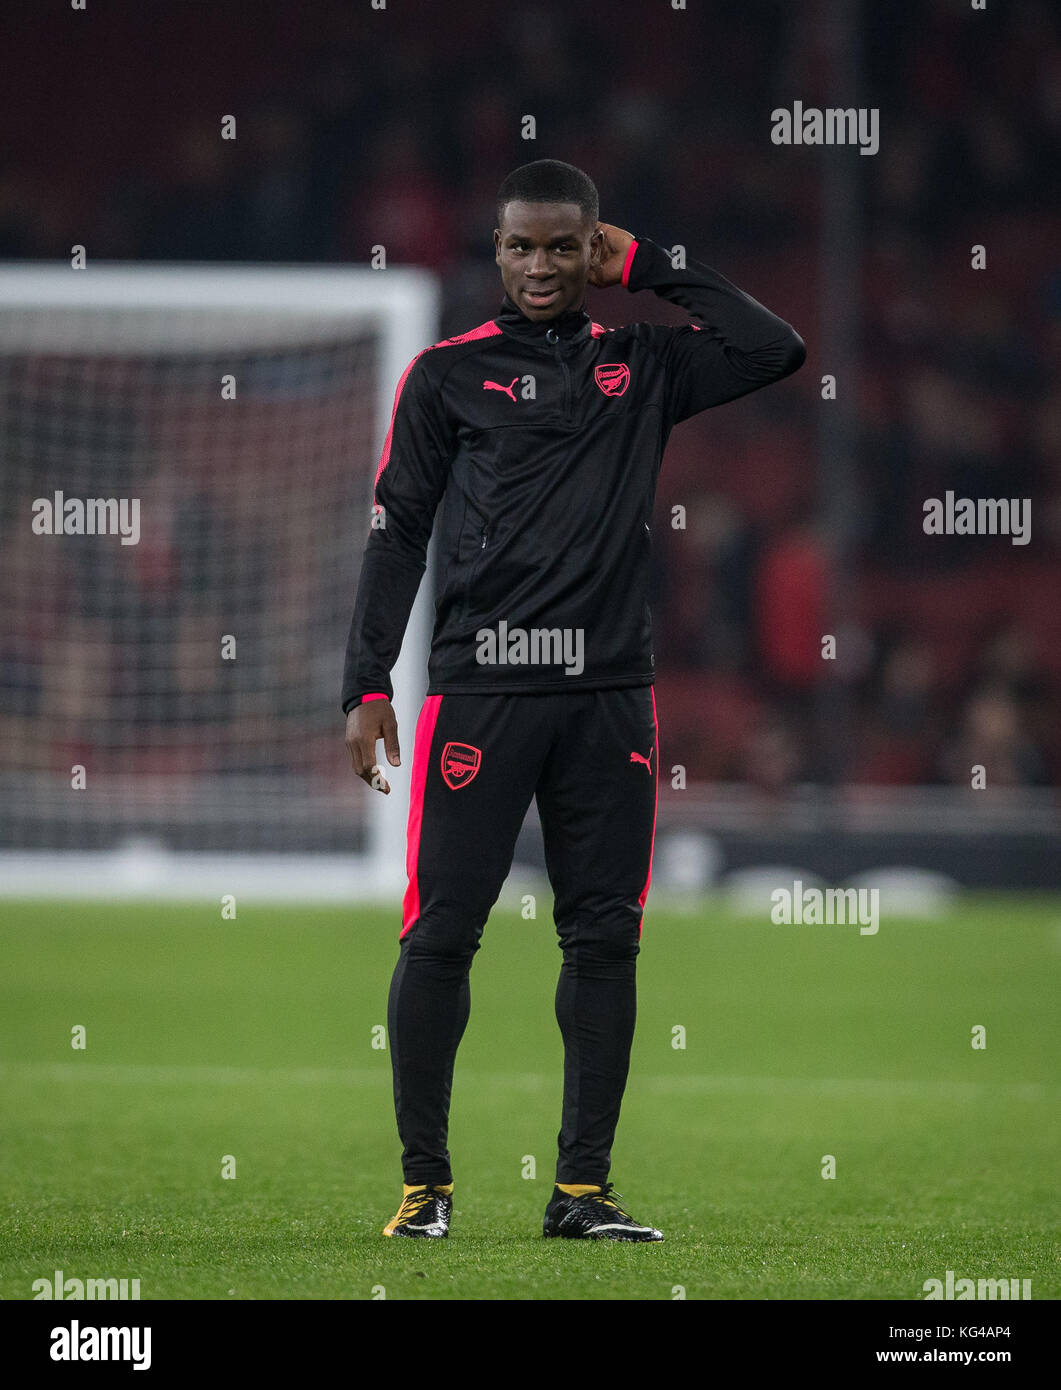 London, UK. 02nd Nov, 2017. Jordi Osei-Tutu of Arsenal ahead of the UEFA Europa League group stage match between Arsenal and FC Red Star Belgrade at the Emirates Stadium, London, England on 2 November 2017. Photo by PRiME Media Images. Credit: Andrew Rowland/Alamy Live News Stock Photo